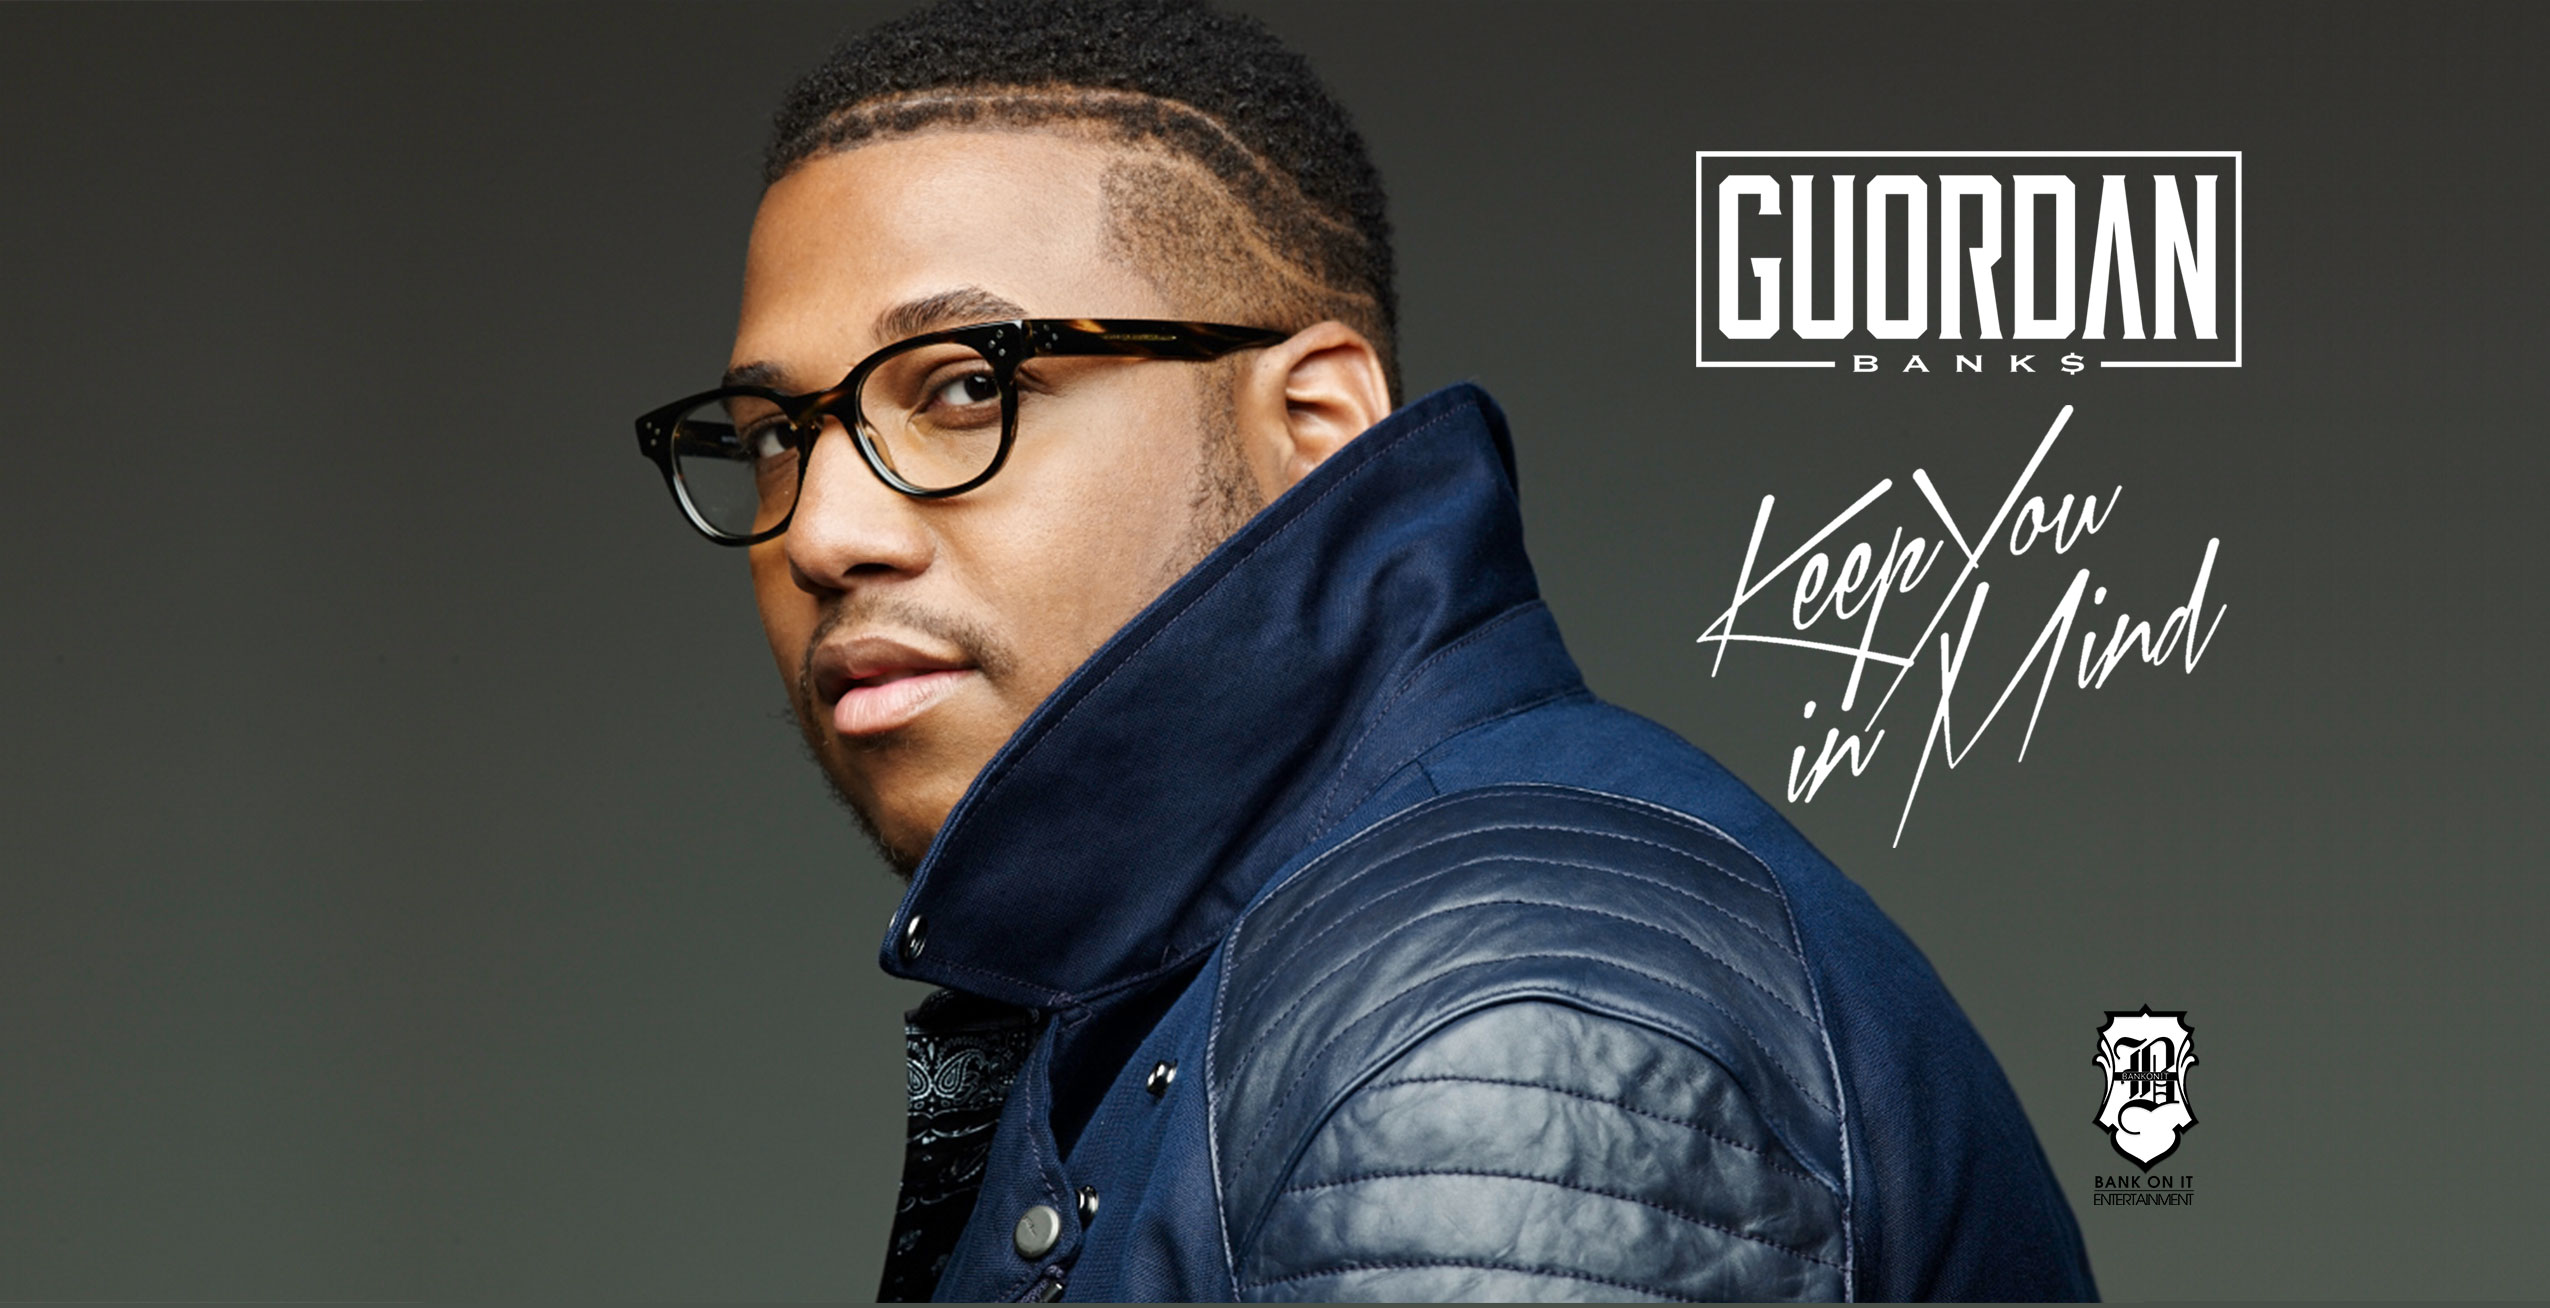 R&B Singer Guordan Banks Song "Keep You In Mind" is on Billboard's Adult R&B National Airplay Most Added & Most Increased Plays Chart.